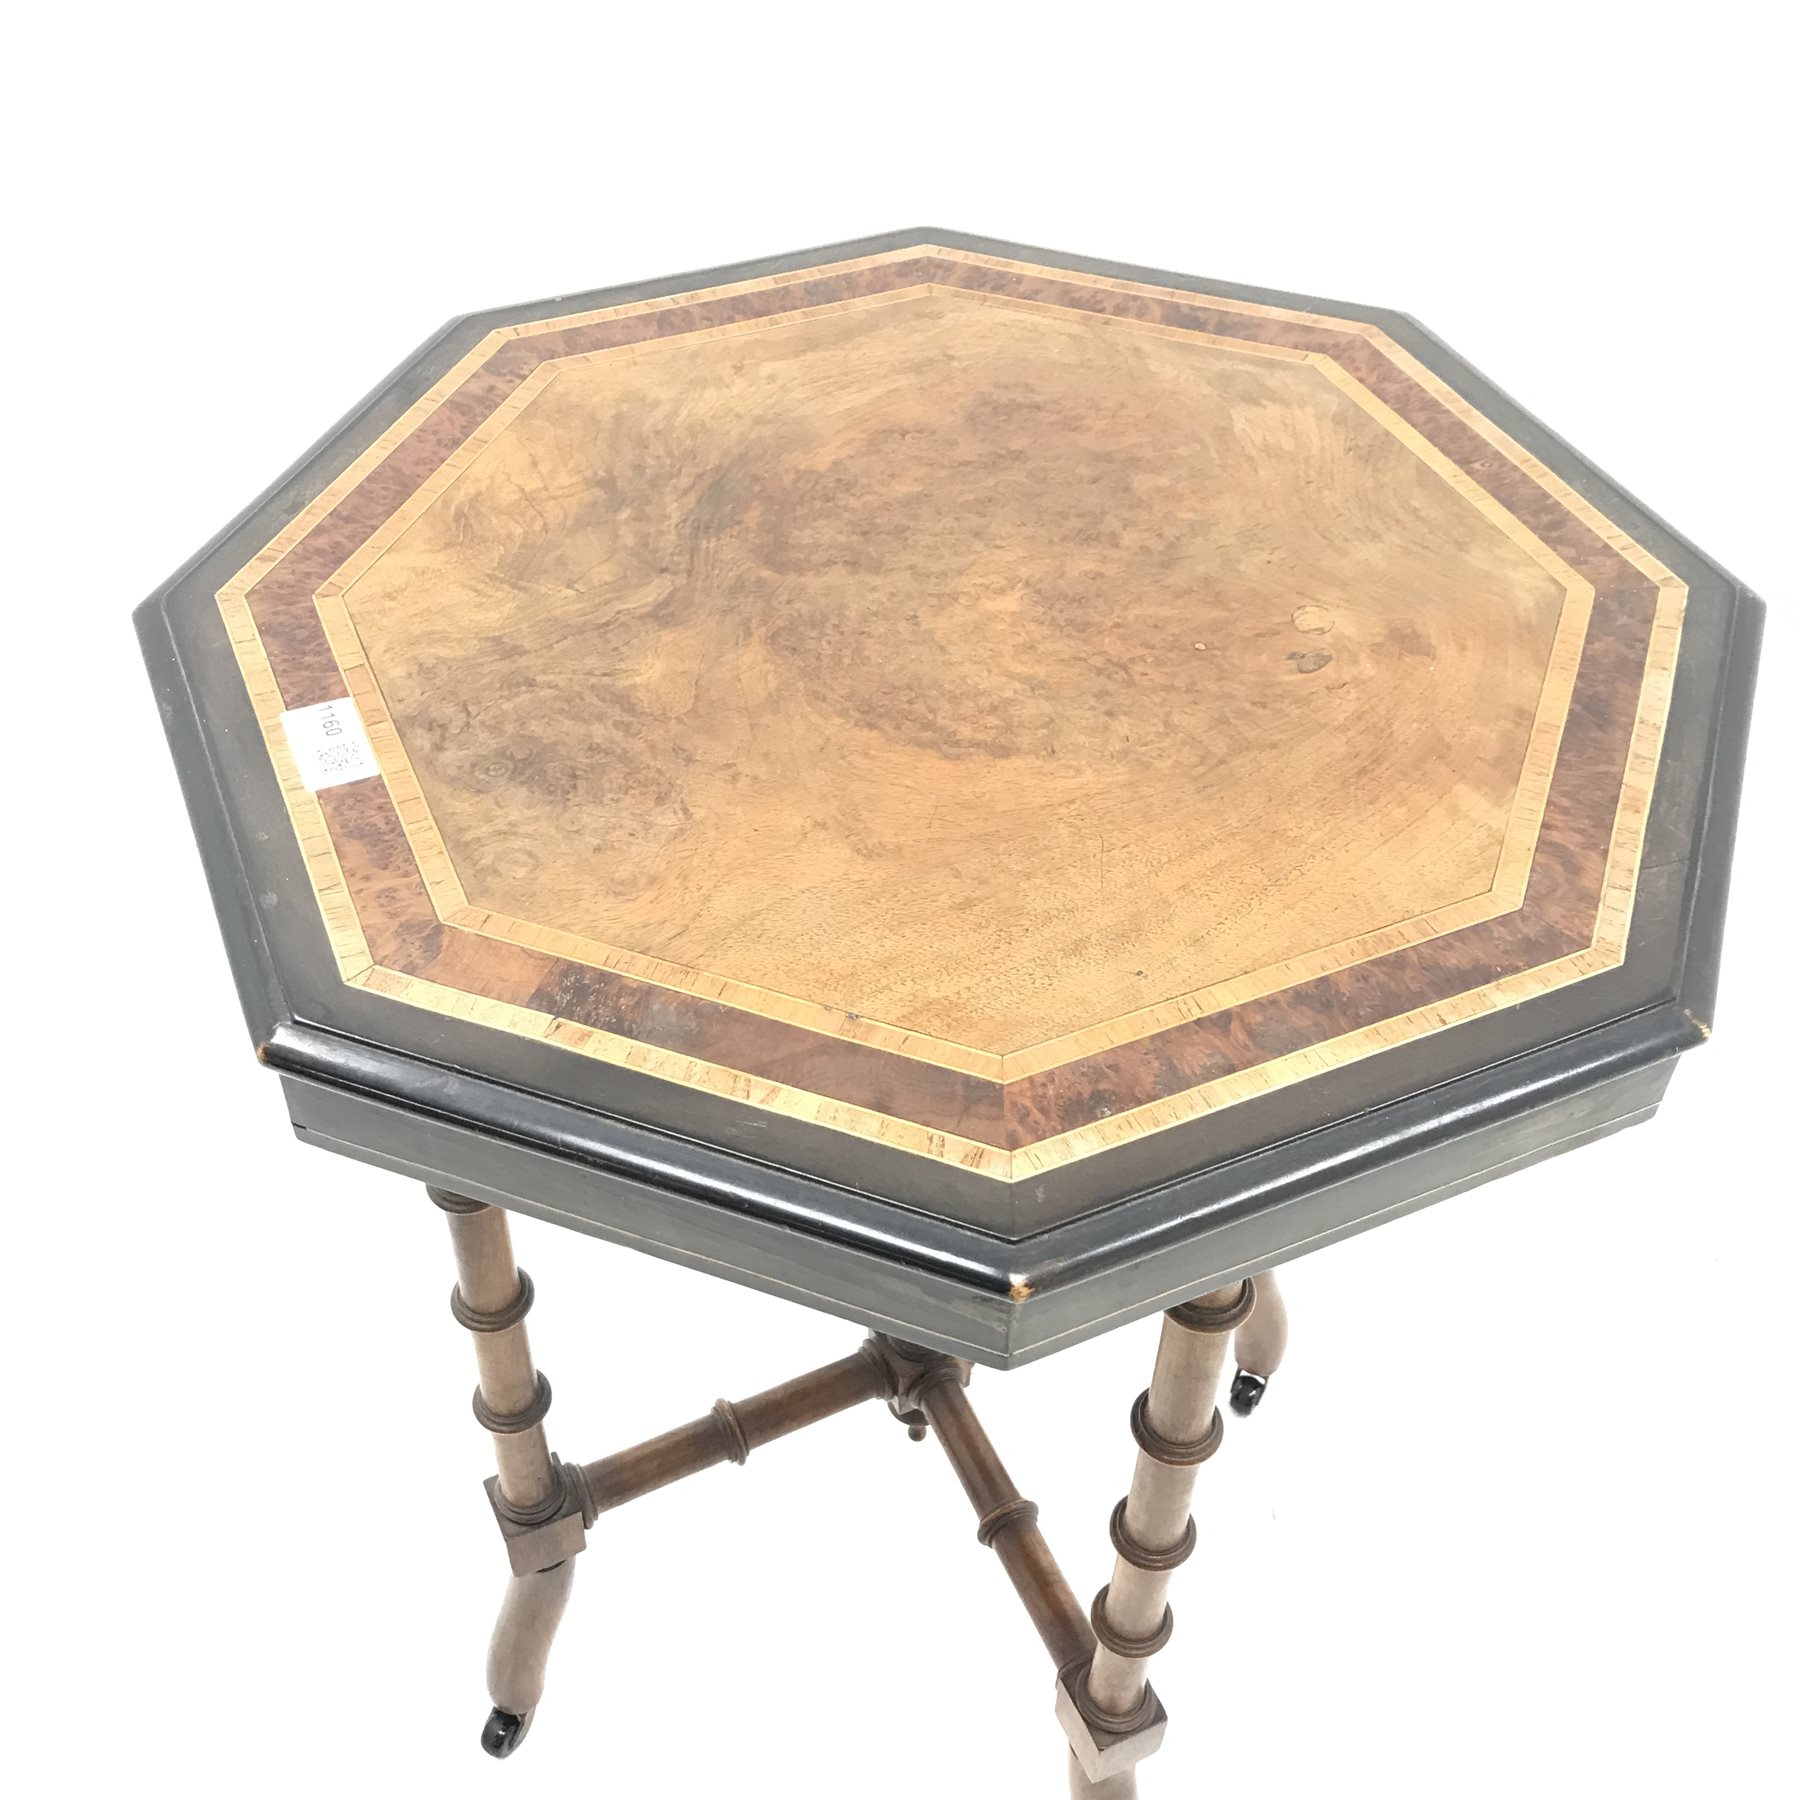 Late Victorian octagonal inlaid walnut, ebonised and amboyna veneered occasional table, D50cm, H64cm - Image 2 of 3